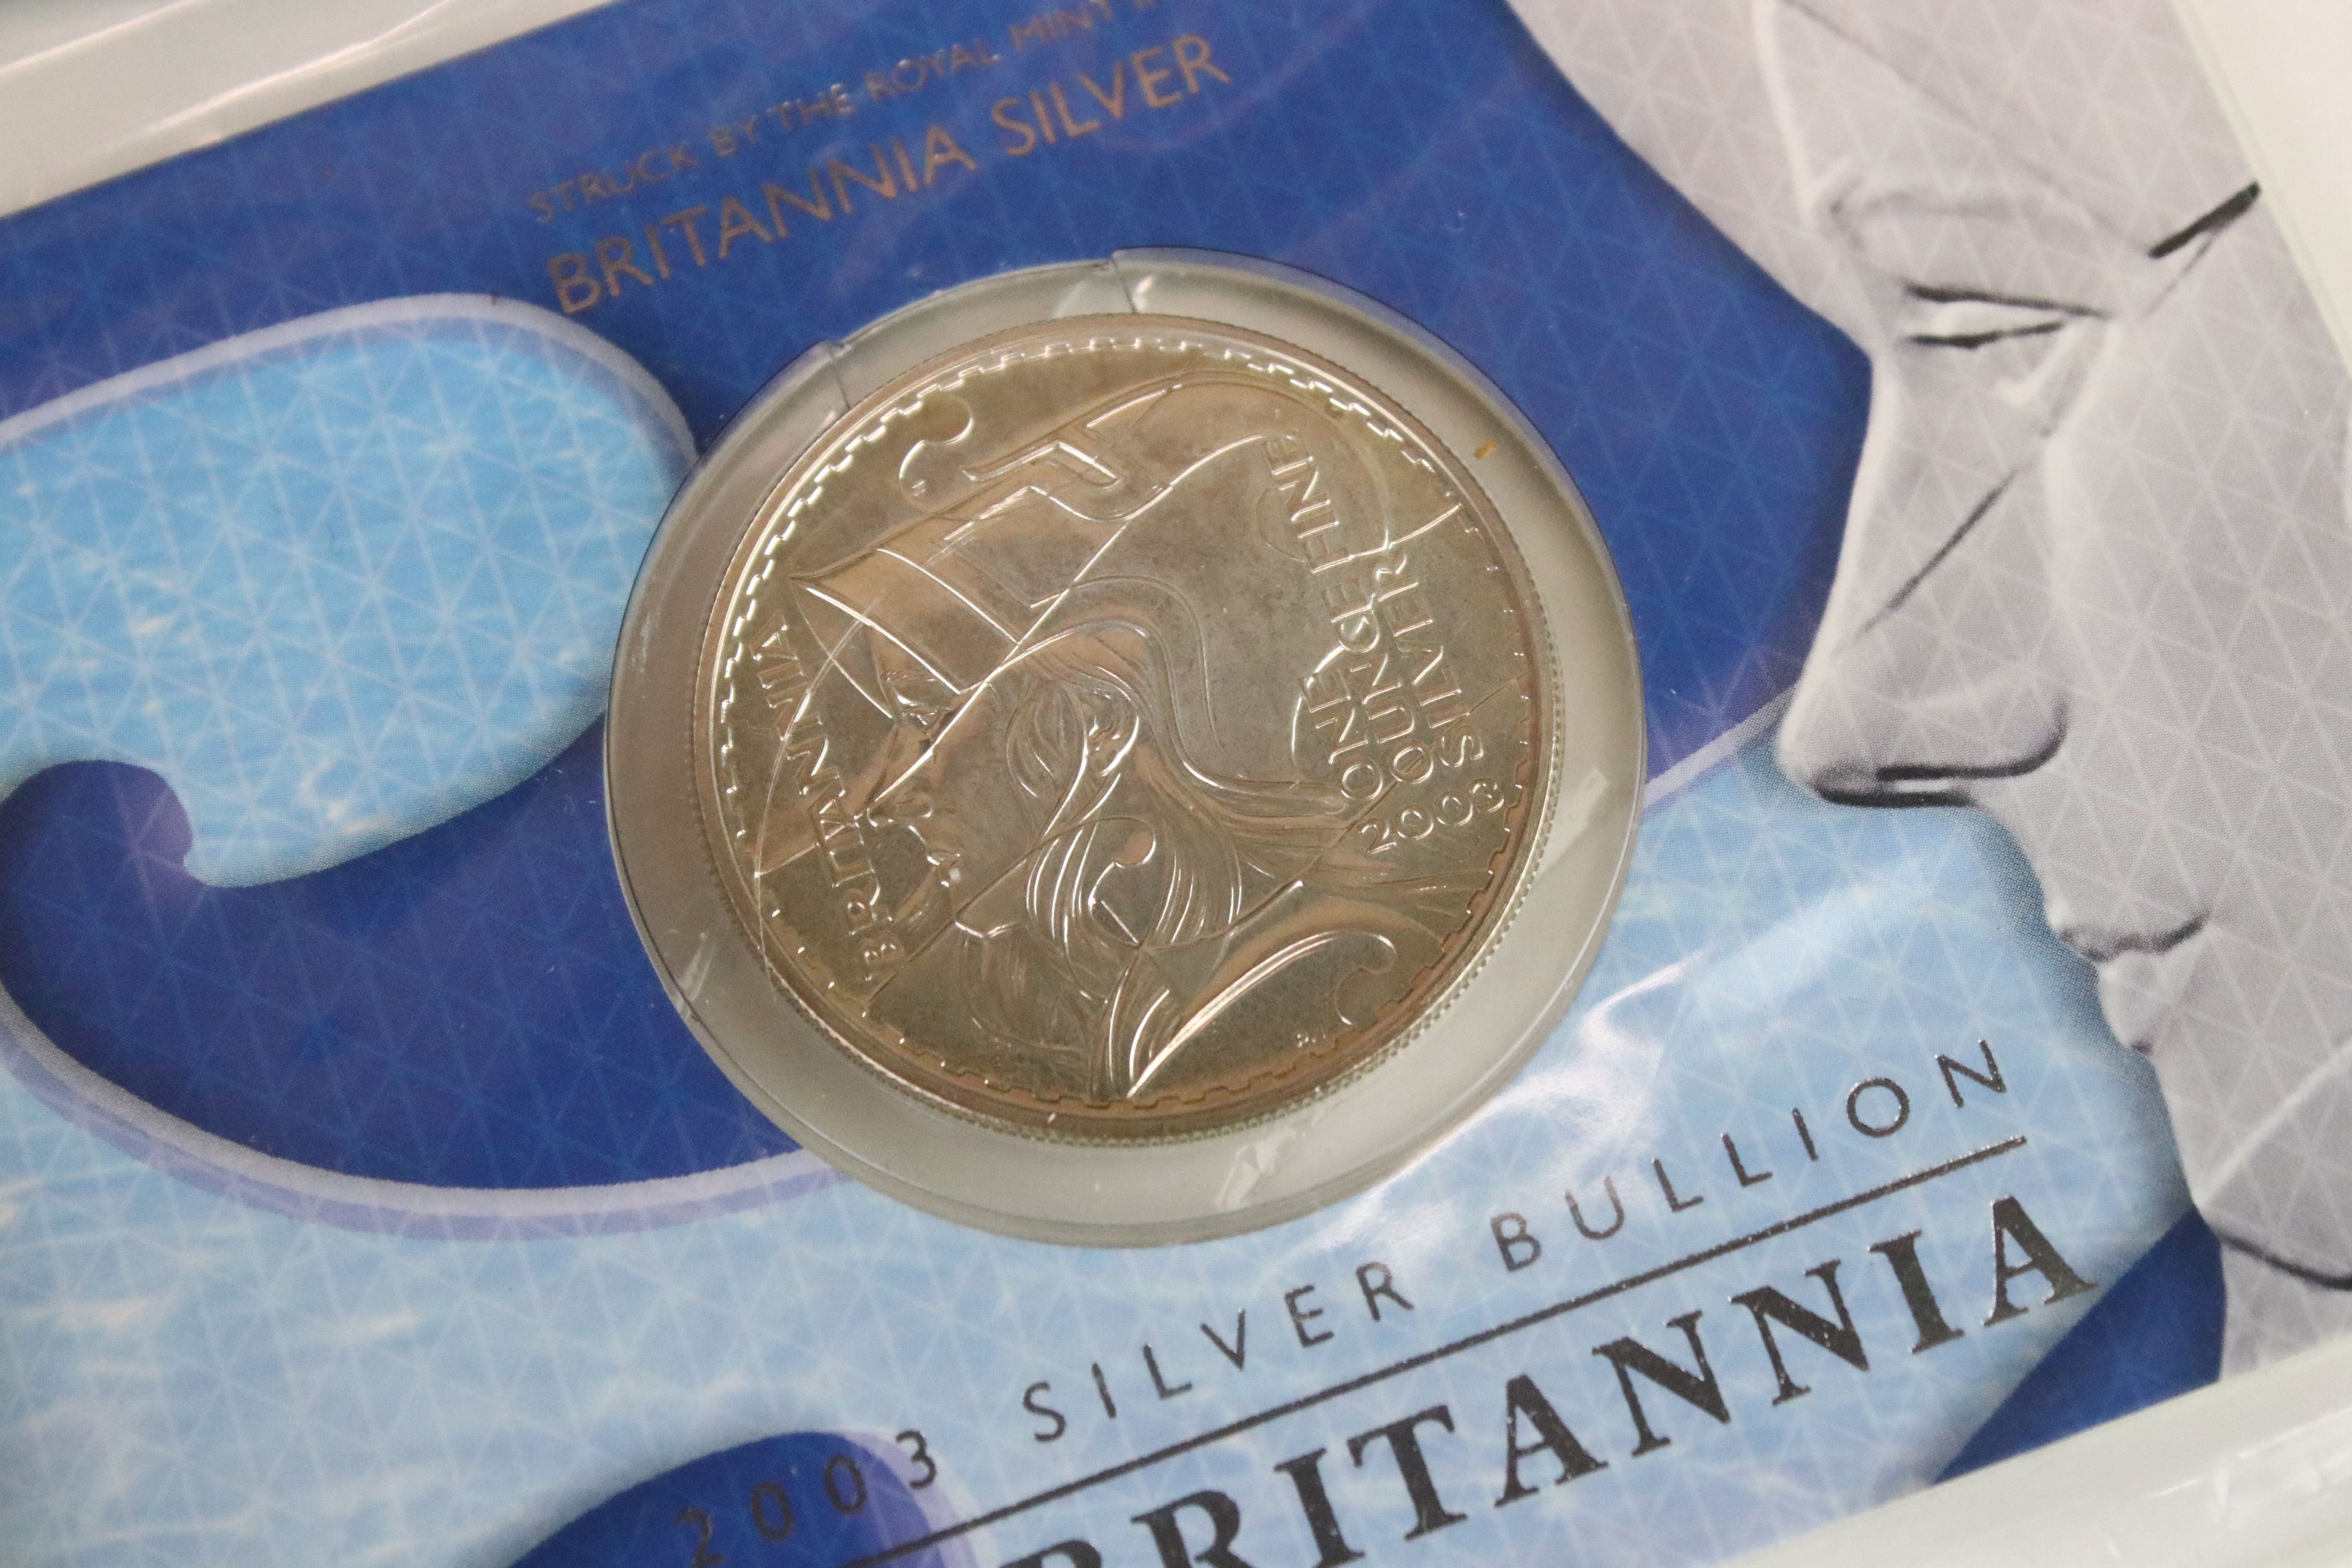 A Small Collection Of Royal Mint Uncirculated Coins To Include A 2003 Silver Bullion £2 Britannia - Image 6 of 6